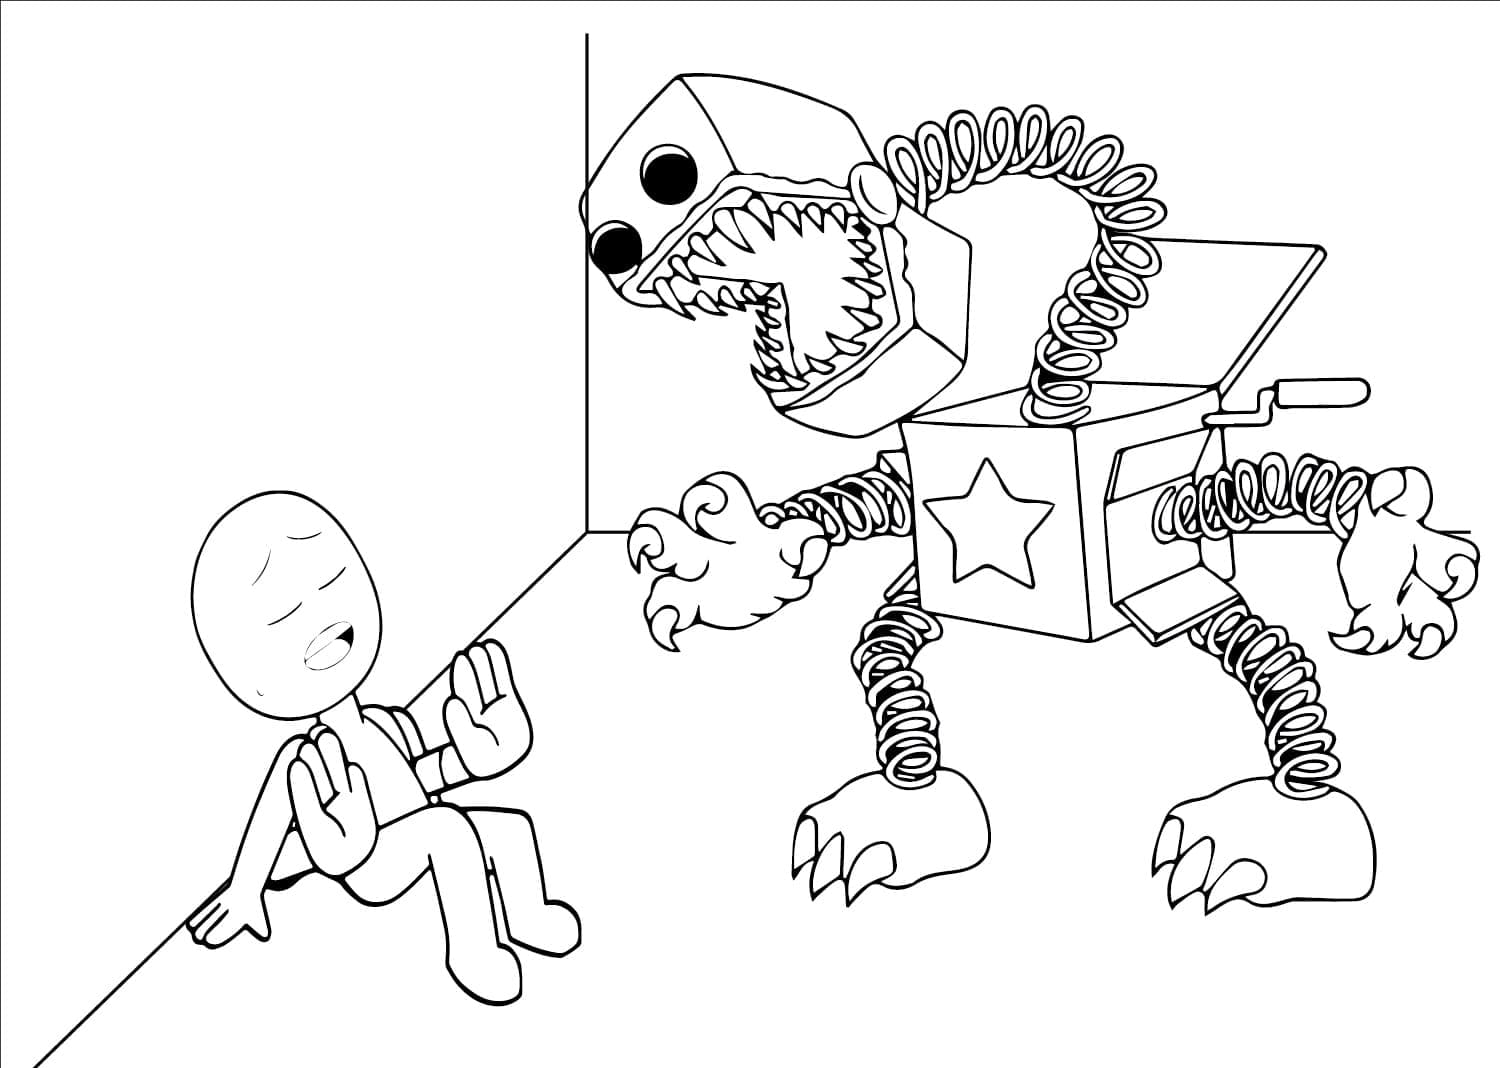 Boxy Boo de Project Playtime coloring page